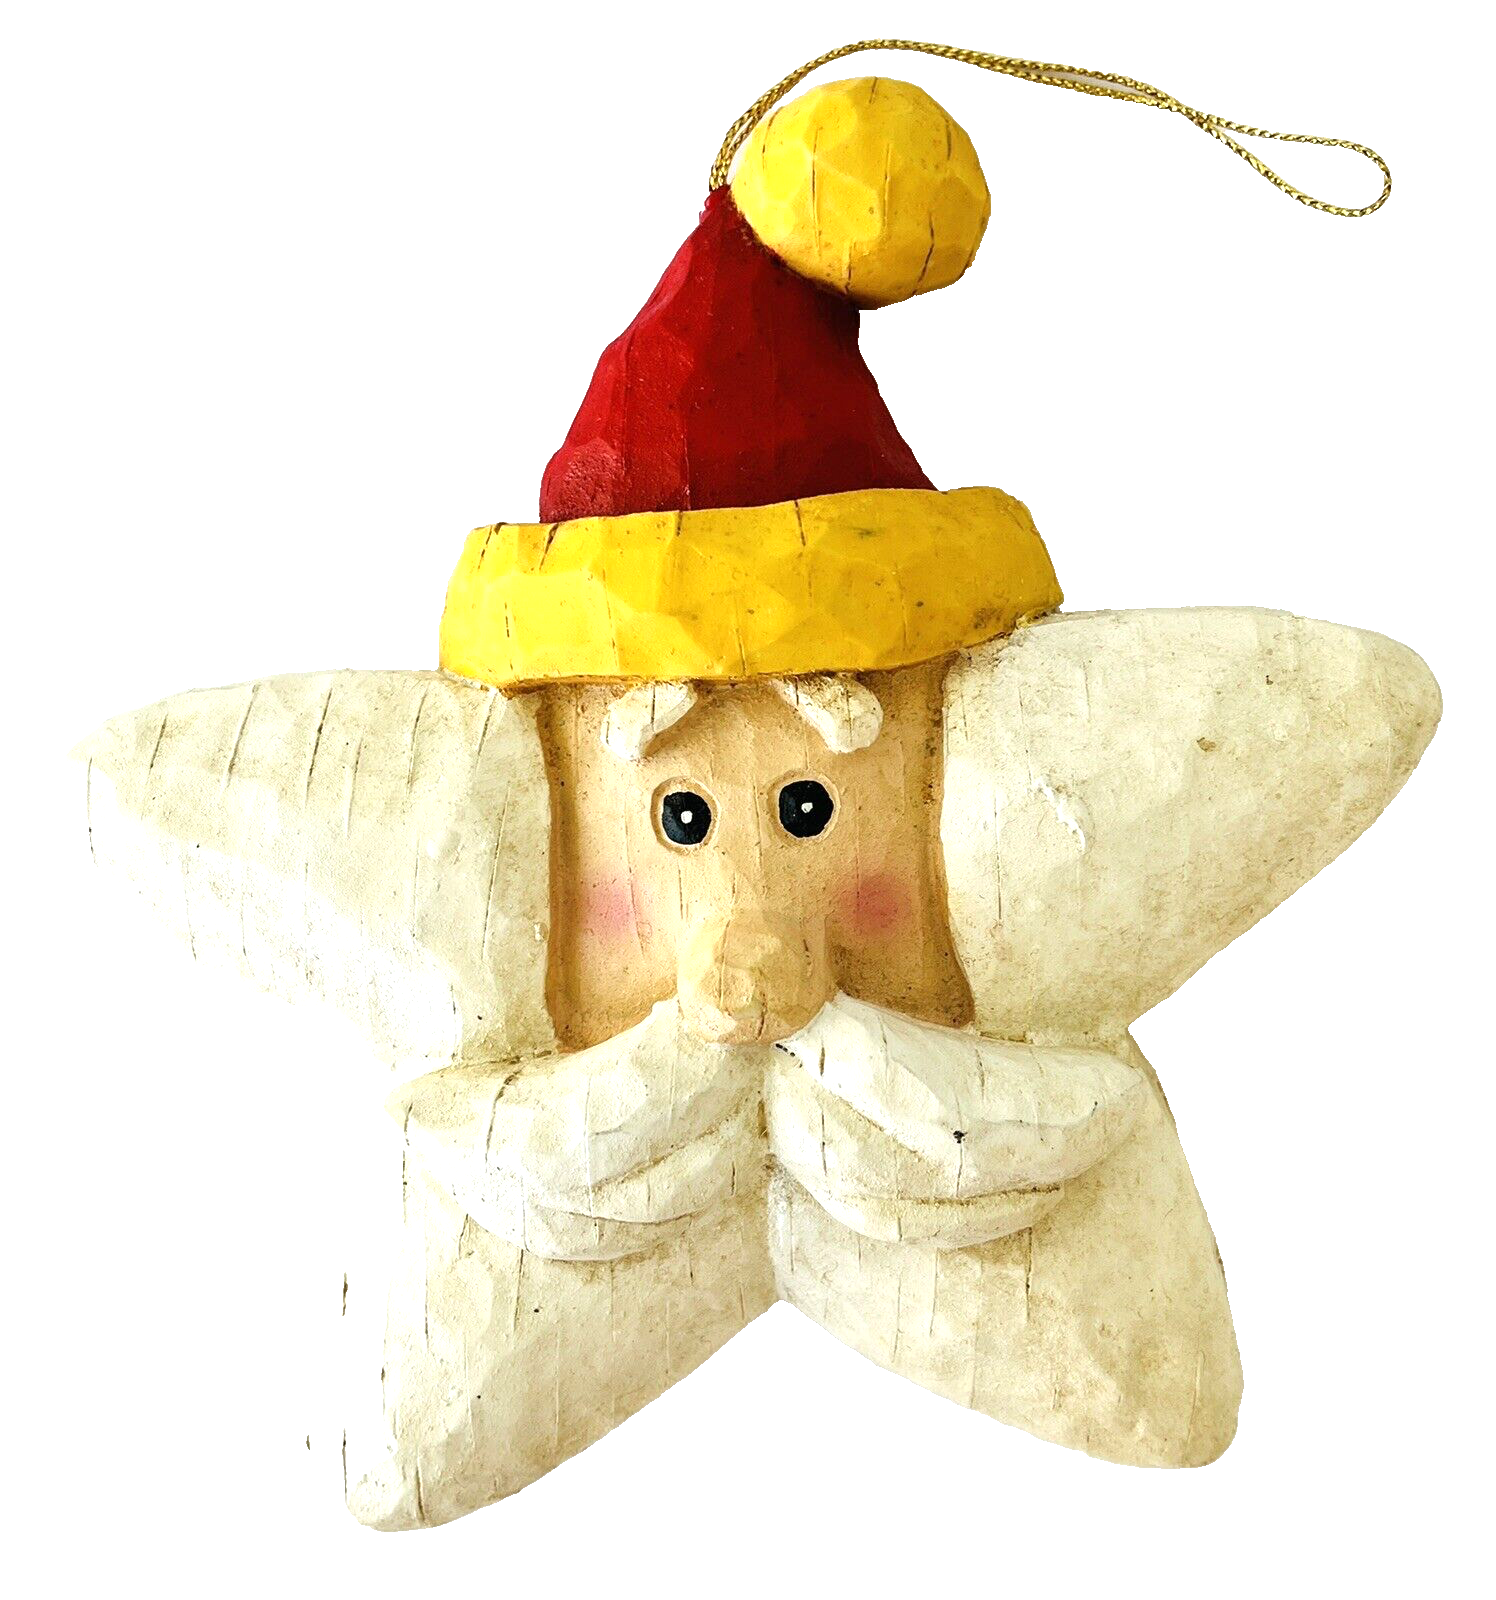 Primary image for Santa Star Christmas Ornament Surprised Expression Faux Wood Styrofoam 6.25"